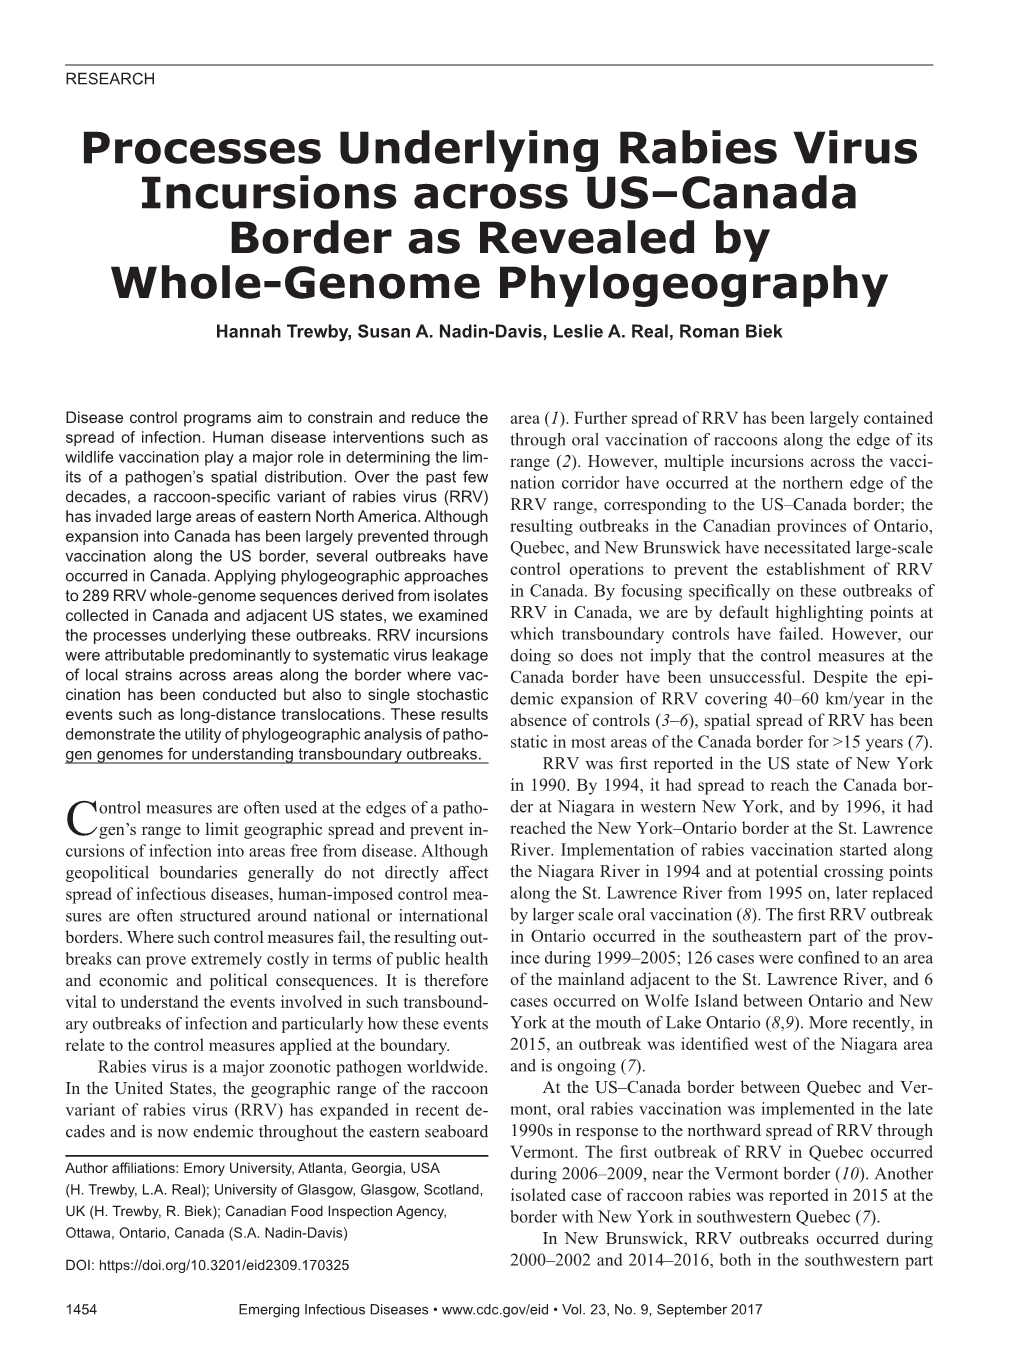 Processes Underlying Rabies Virus Incursions Across US–Canada Border As Revealed by Whole-Genome Phylogeography Hannah Trewby, Susan A